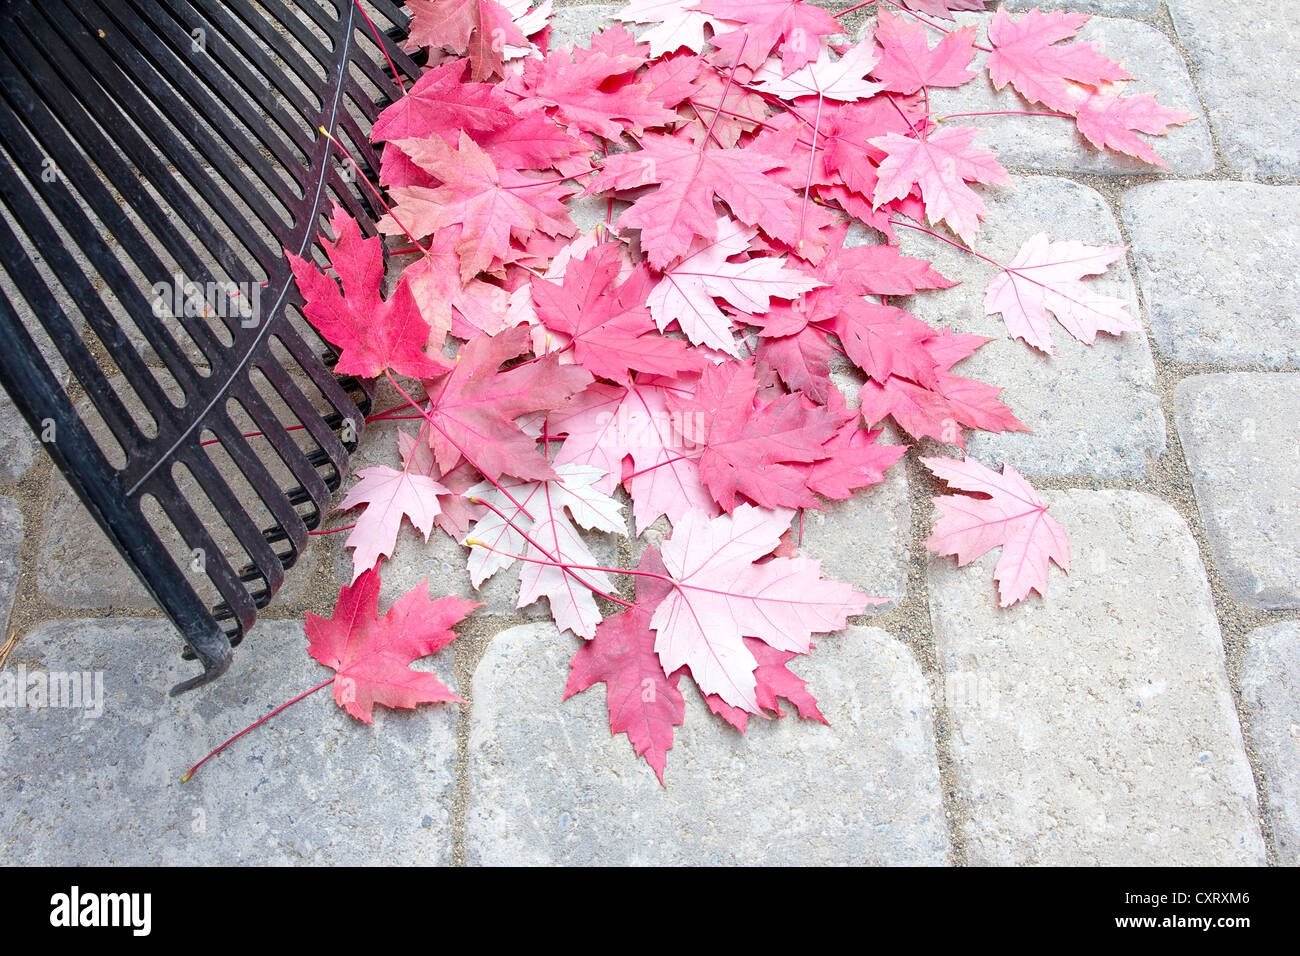 Raking Fallen Red Maple Tree Leaves from Backyard Stone Pavers Patio in Autumn Stock Photo